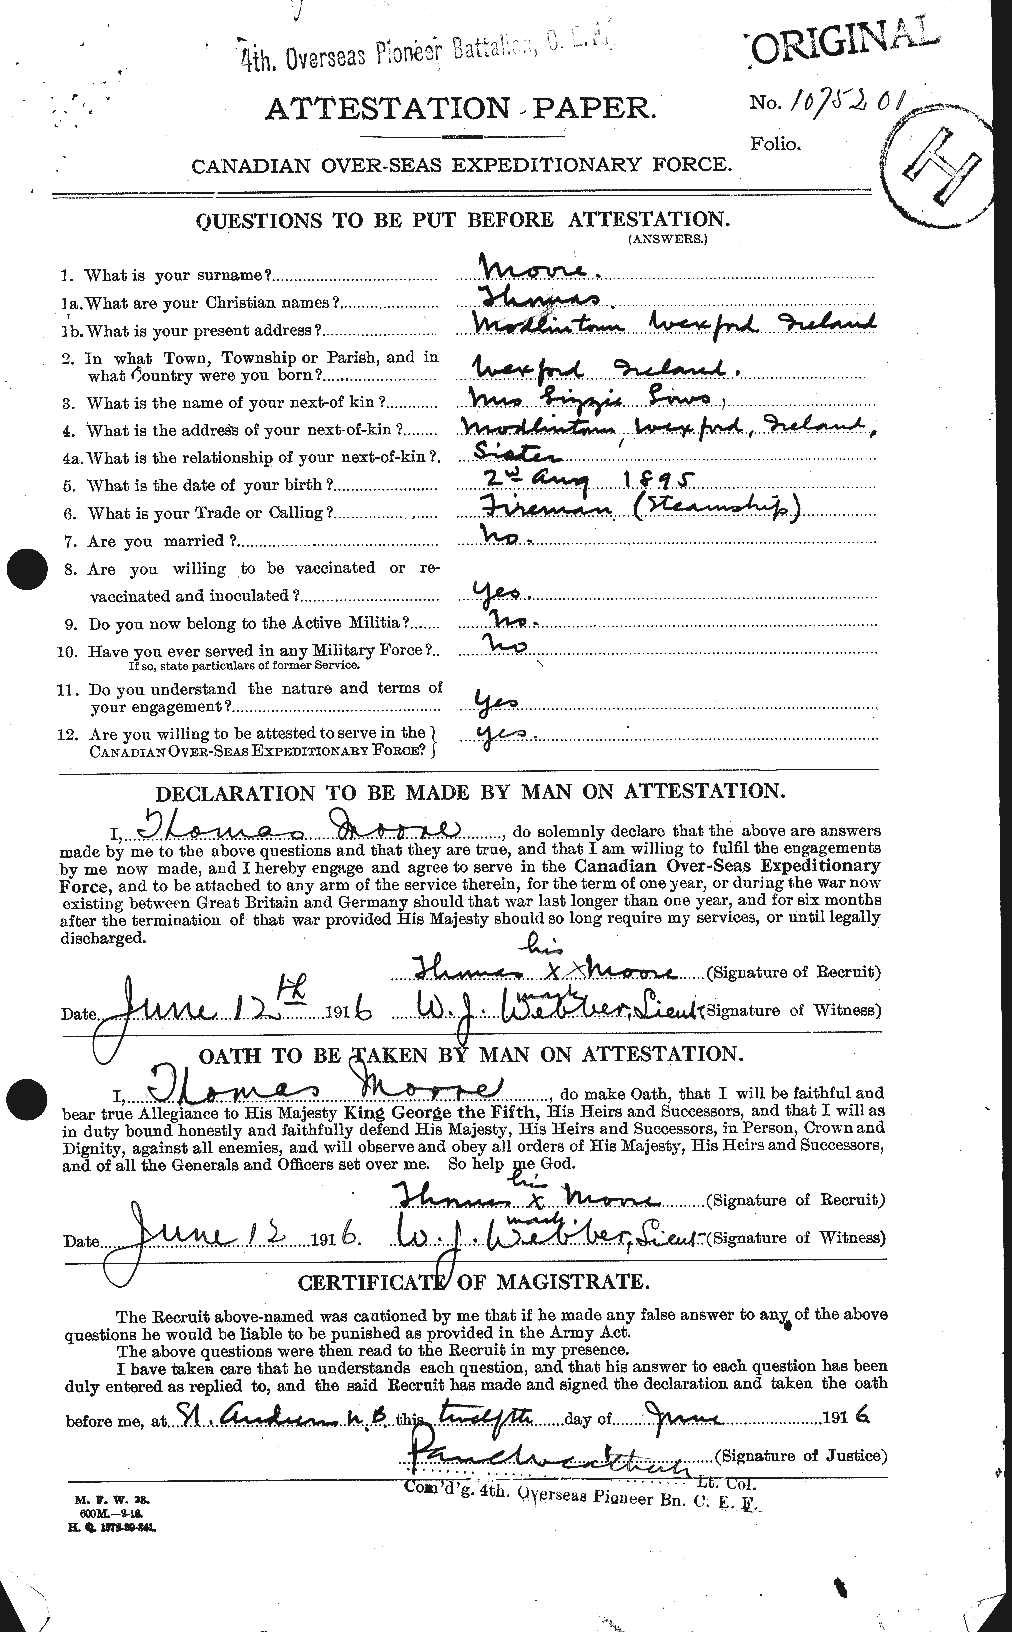 Personnel Records of the First World War - CEF 505631a